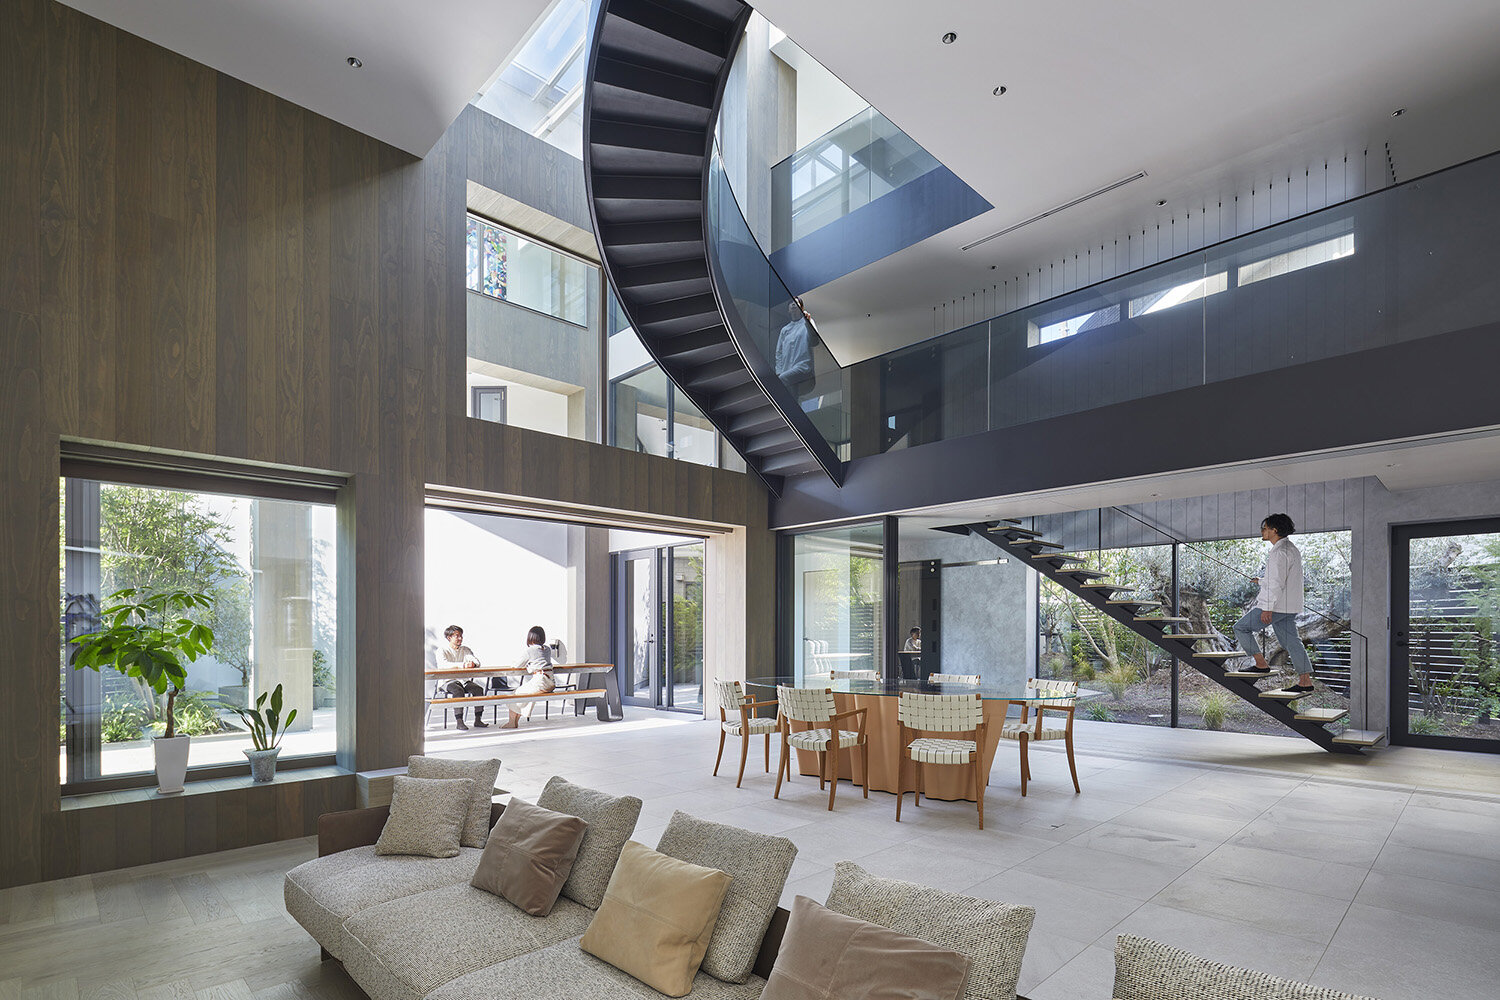  Japanese architecture design studio SINATO led by Chikara Ono has designed a residence ‘Shoto S‘ in Tokyo. An interior design of the residence.  